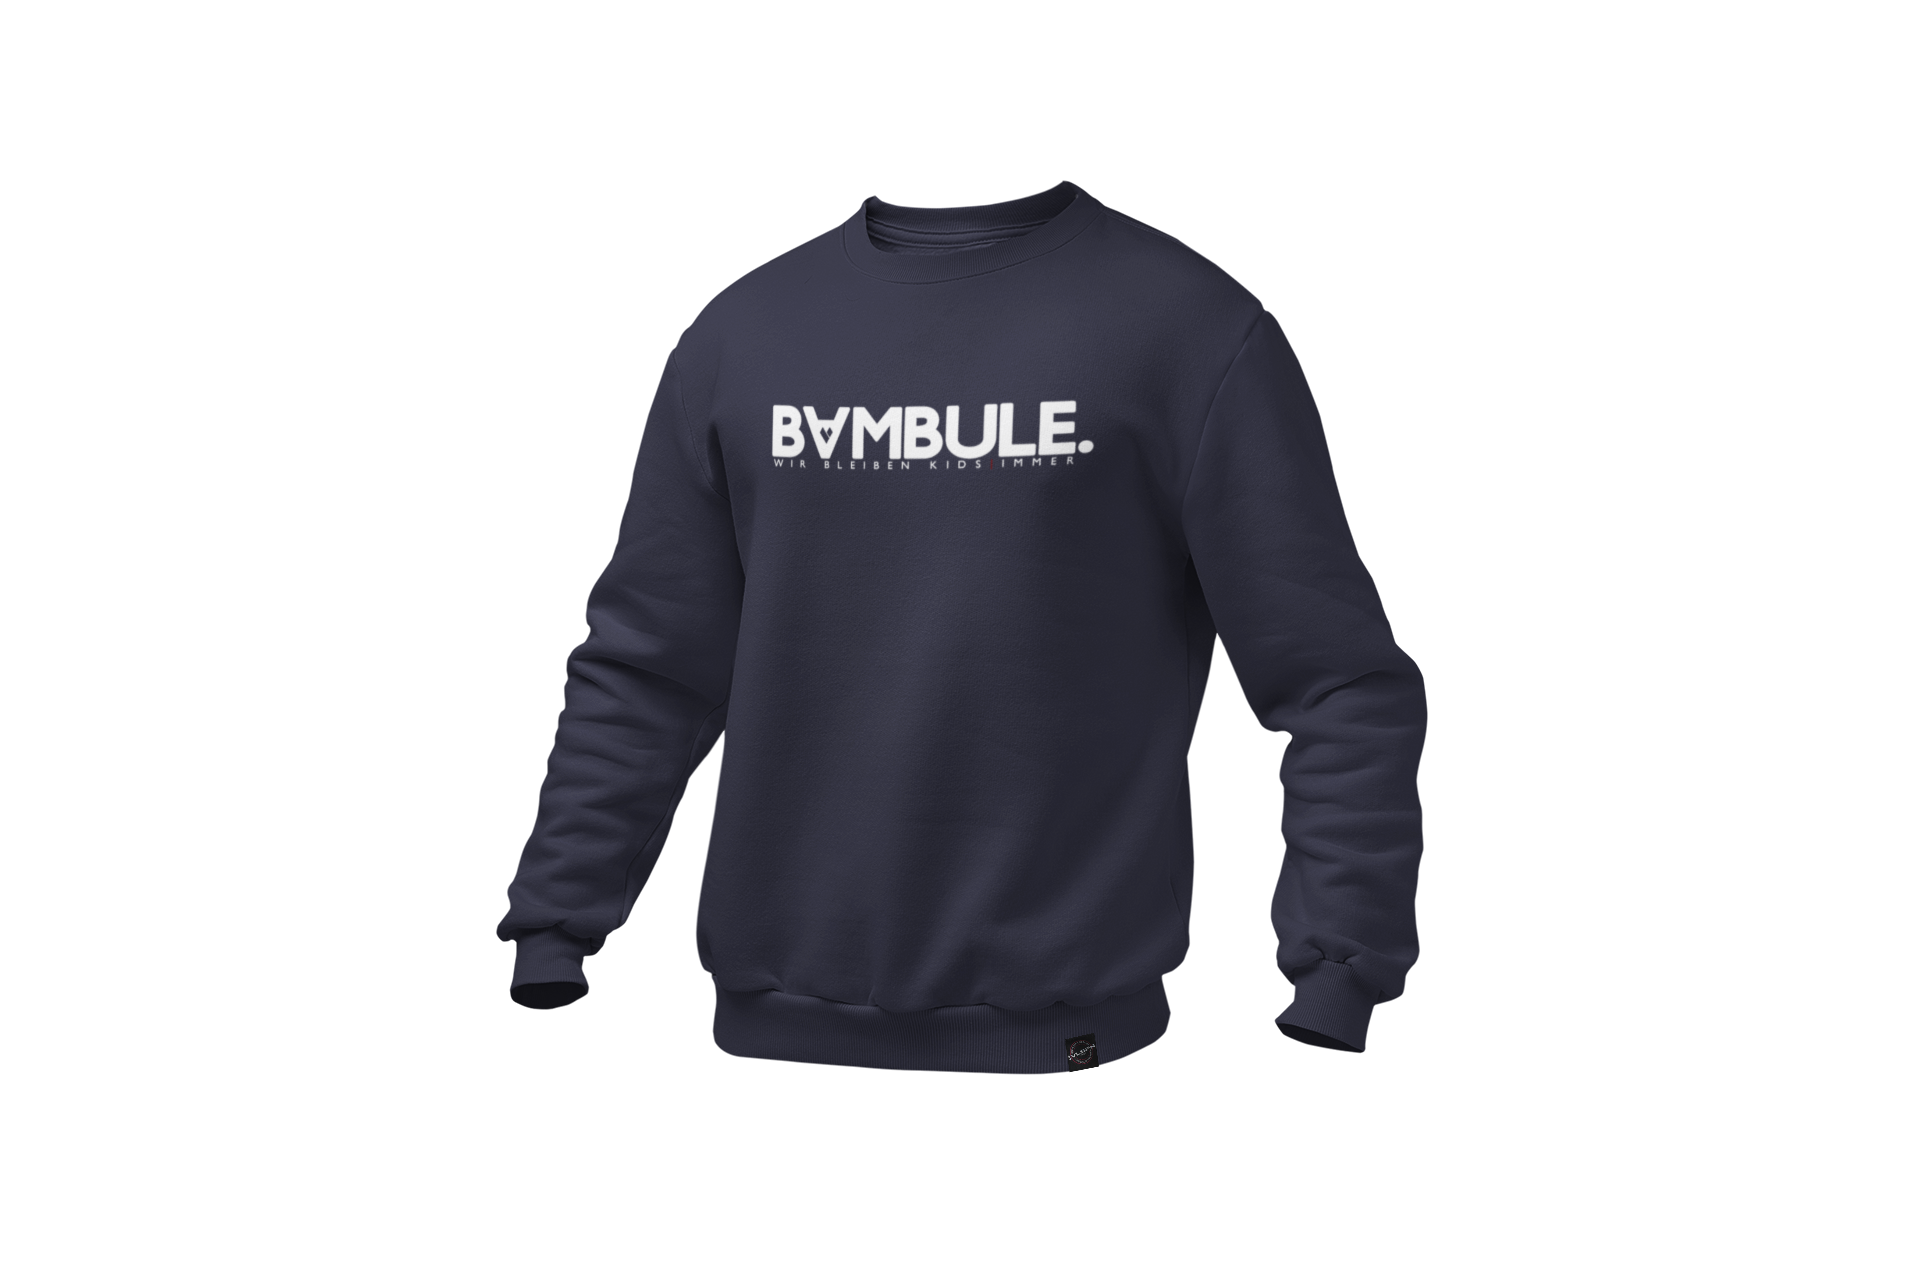 mockup-of-a-ghosted-crewneck-sweatshirt-over-a-solid-background-26960 - 2021-02-09T143252.728.png